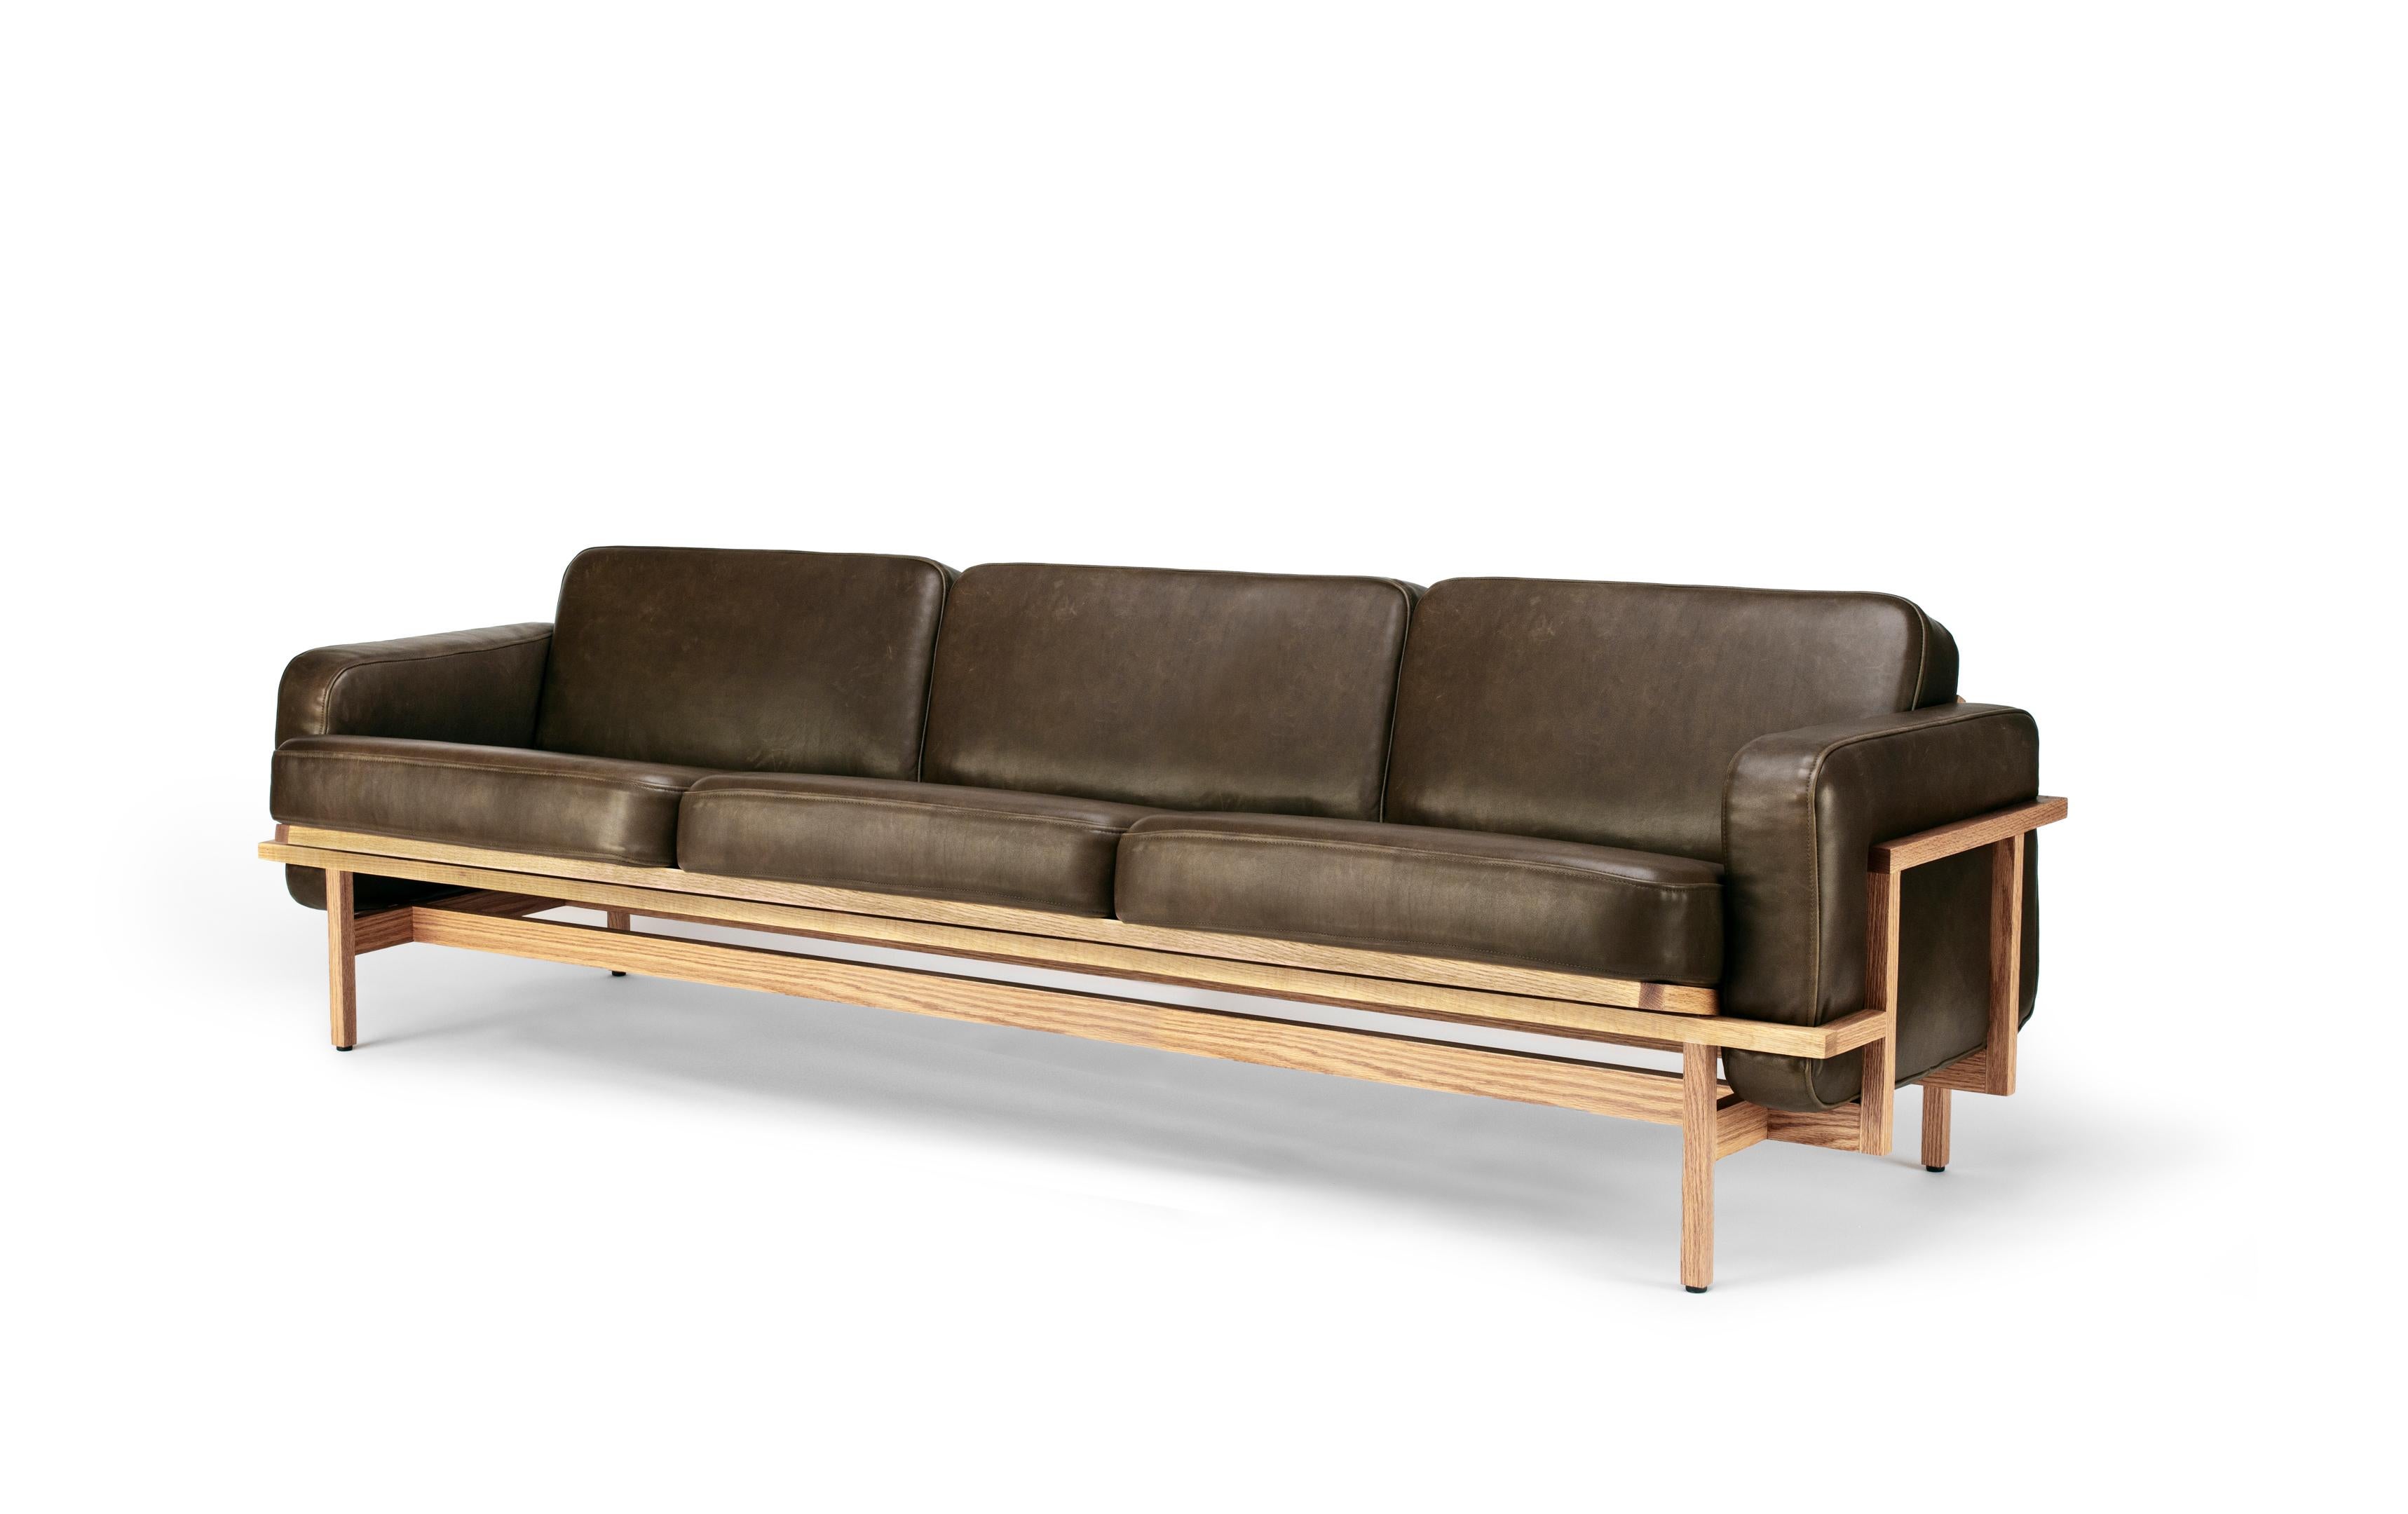 This Tres Plazas is a true masterpiece of design and craftsmanship. The structure of the sofa stands tall, almost like a tribute to the art of furniture-making. The delicate framework of wood is not only visually stunning, but also allows for the